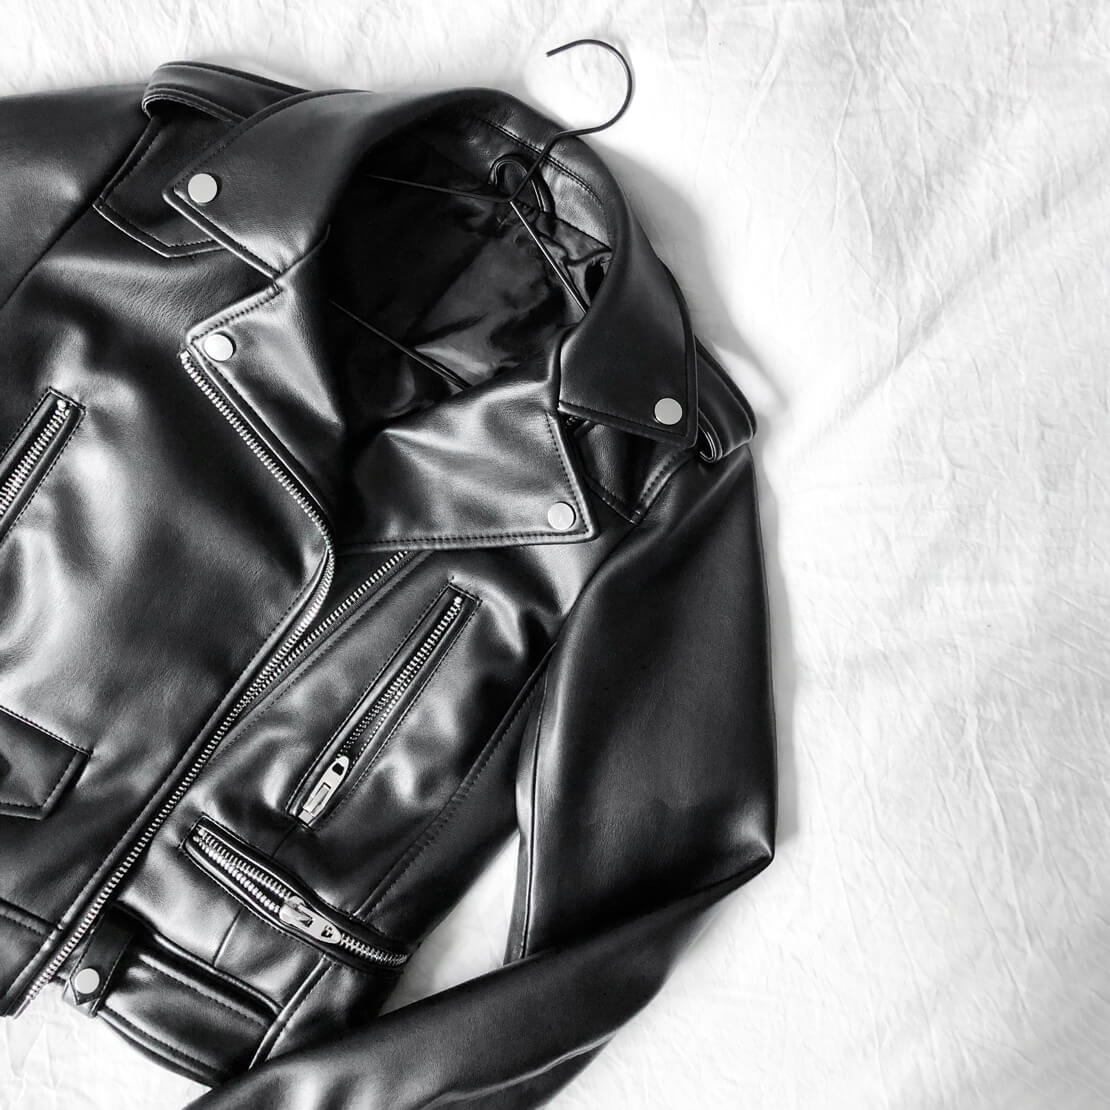 How to take care of your leather jacket?